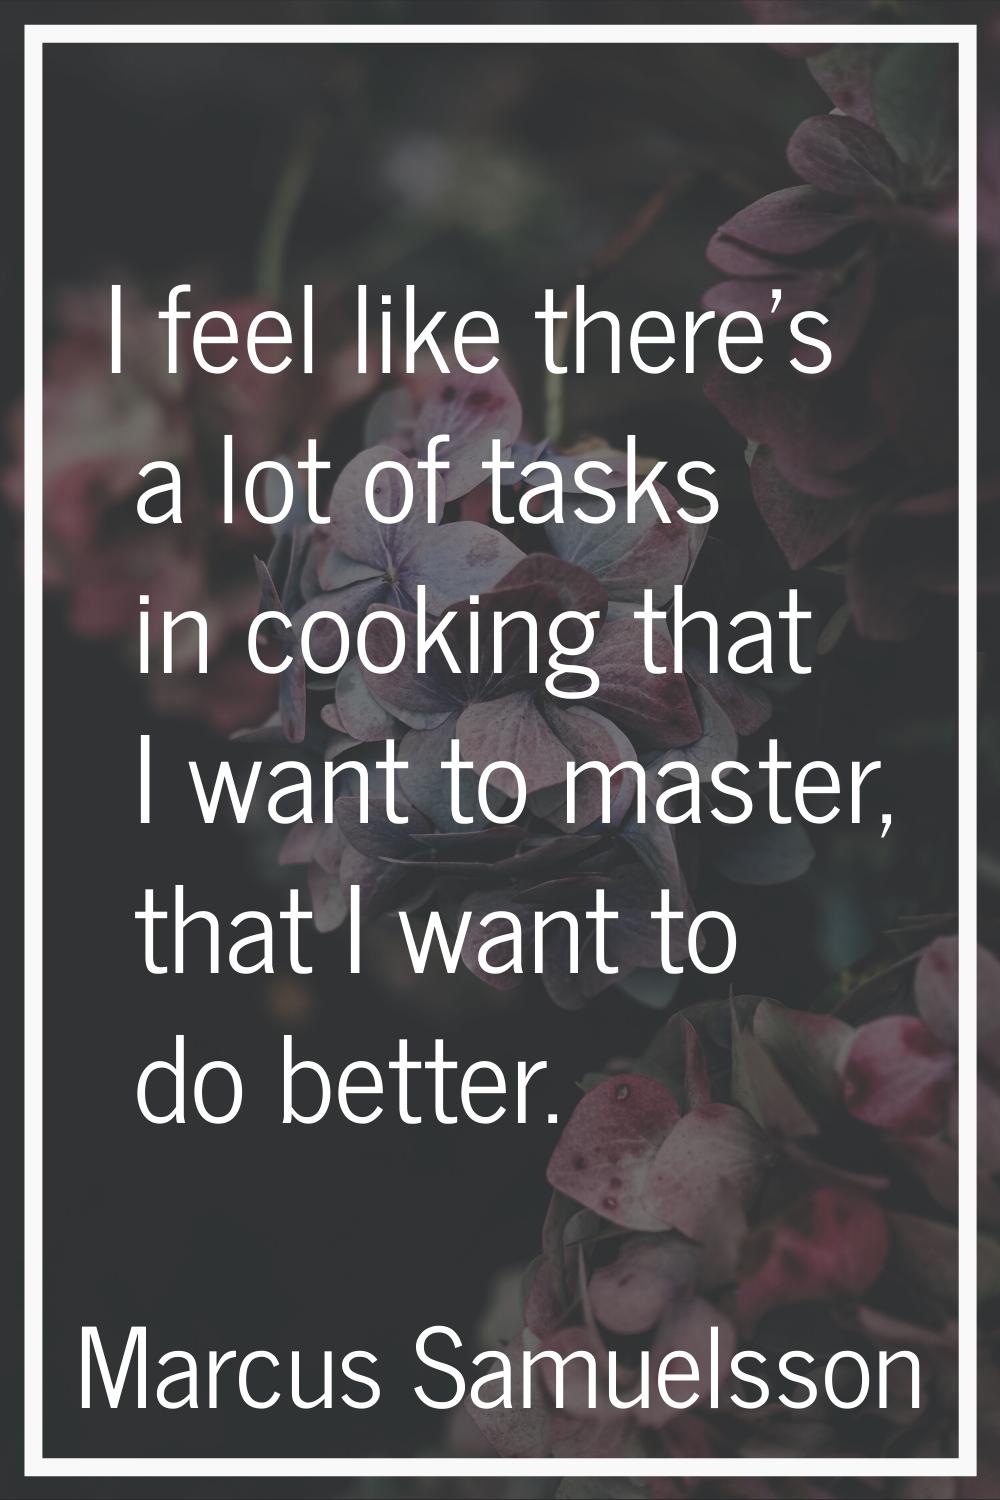 I feel like there's a lot of tasks in cooking that I want to master, that I want to do better.